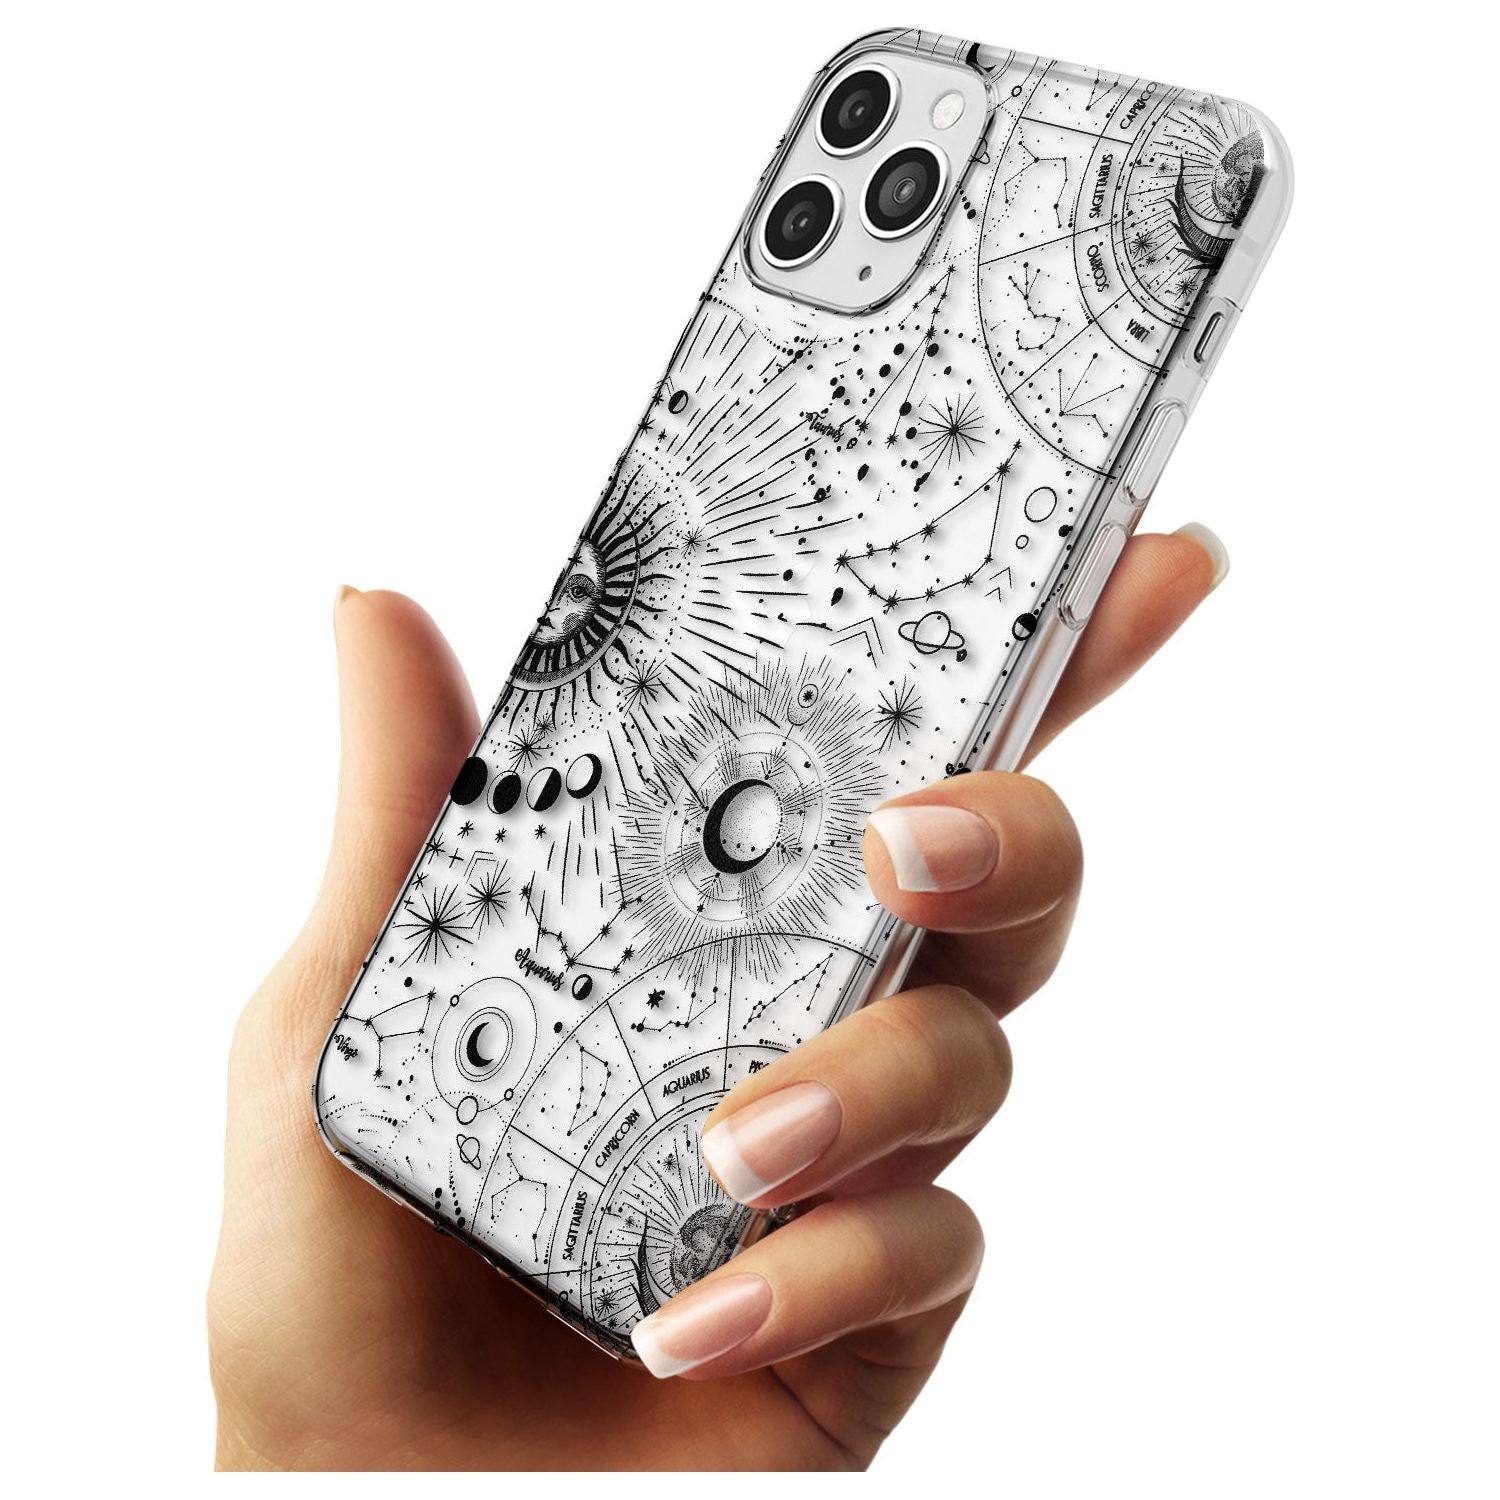 Suns & Constellations Astrological Slim TPU Phone Case for iPhone 11 Pro Max